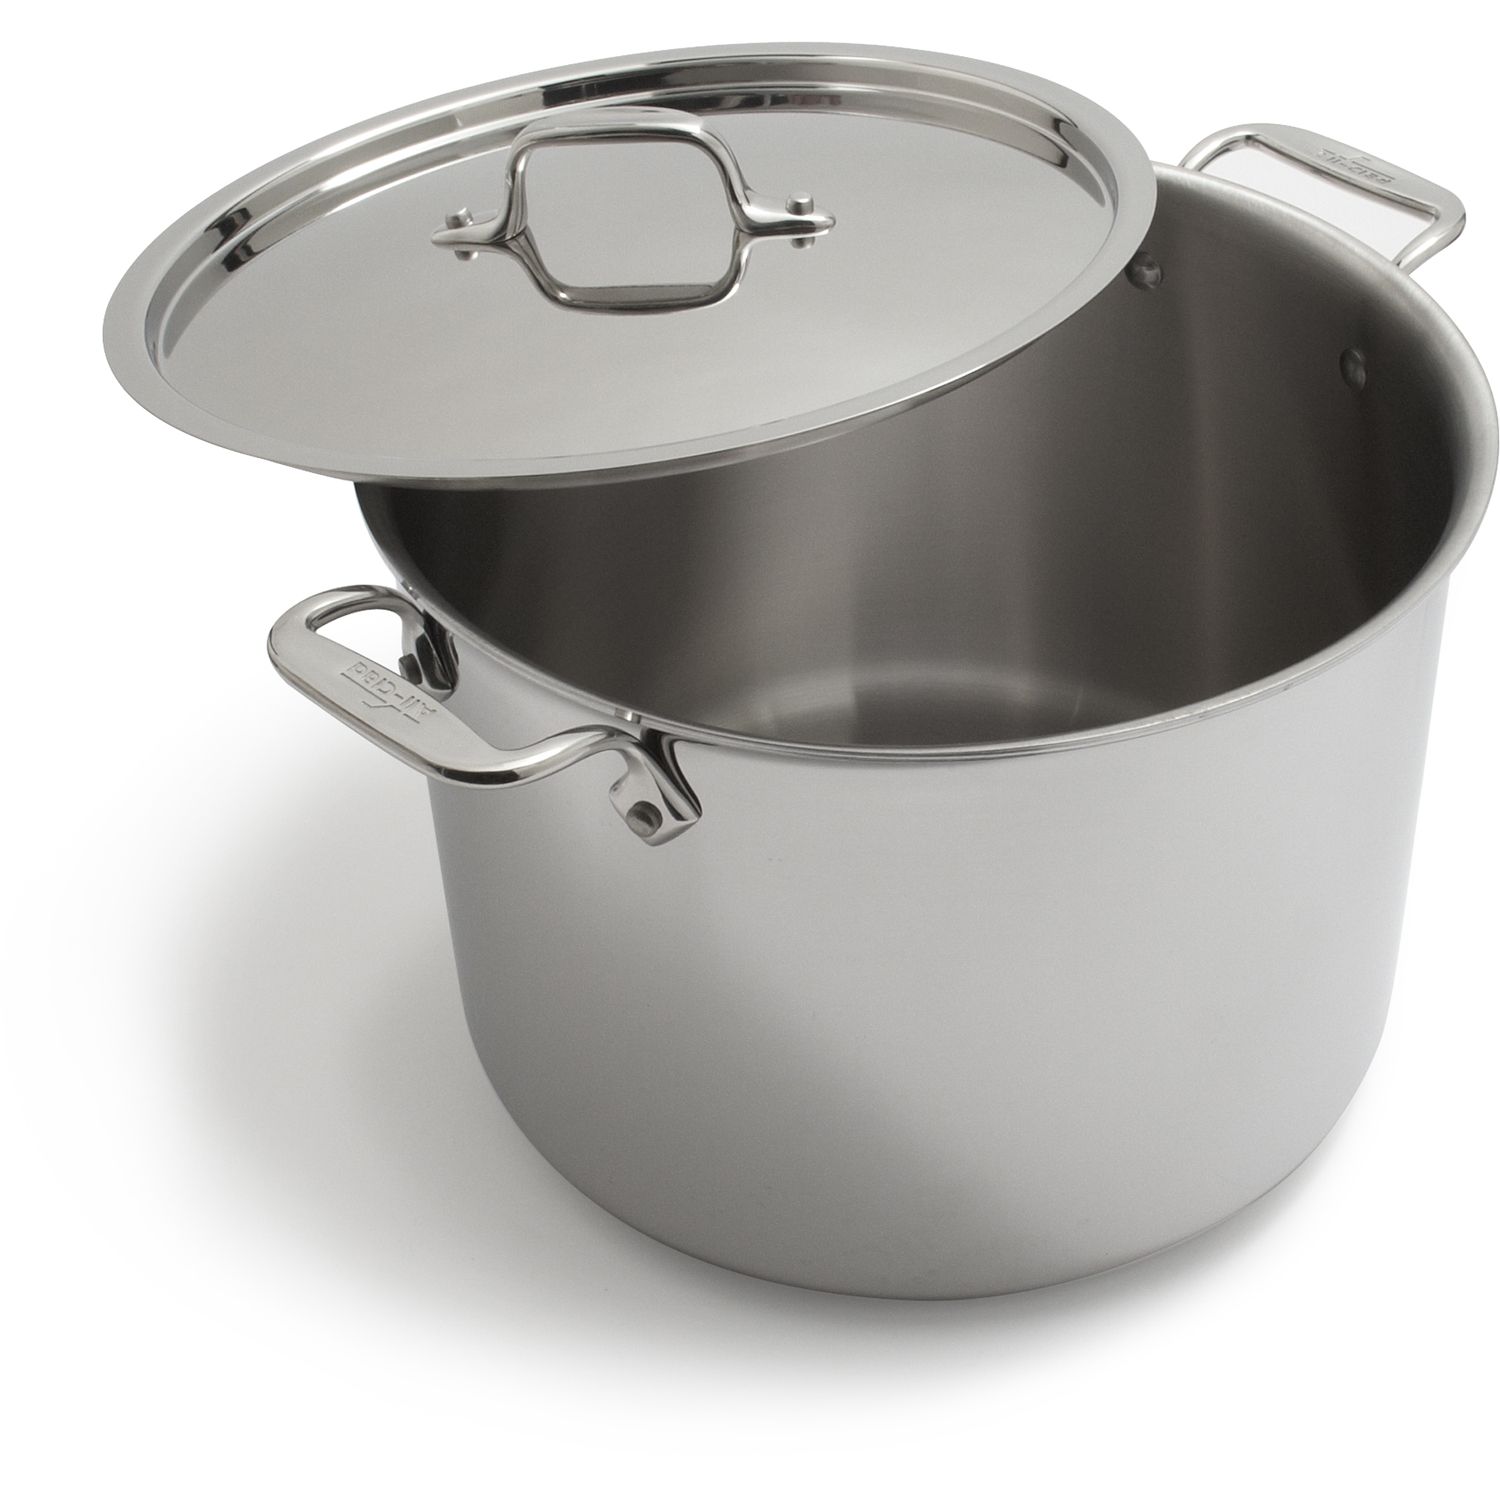 All-Clad® Stainless Steel Stockpot | Sur La Table